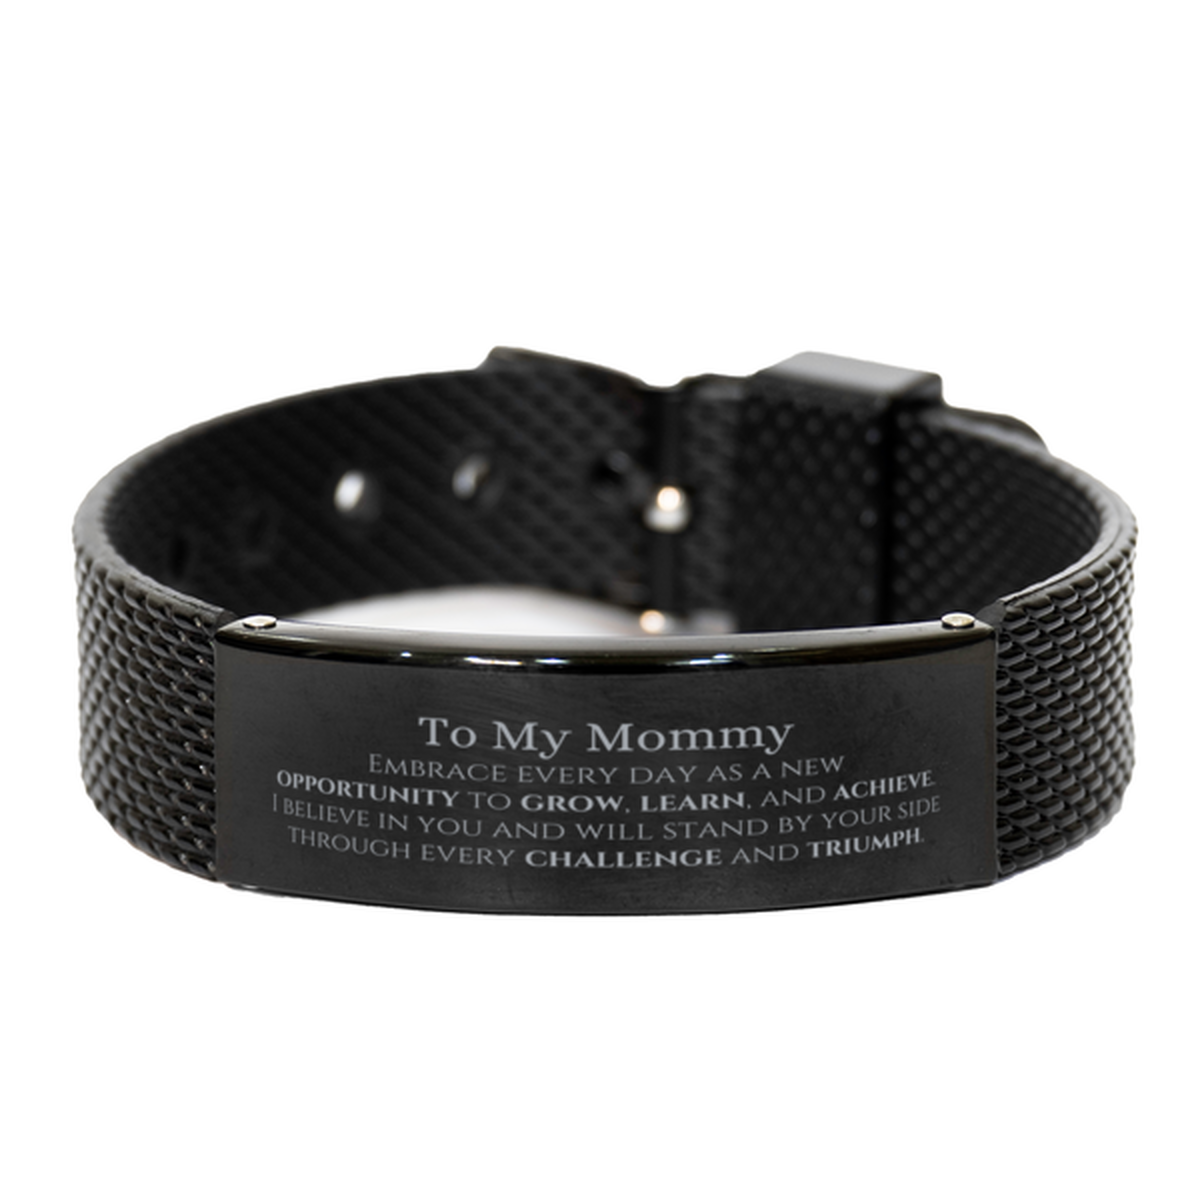 To My Mommy Gifts, I believe in you and will stand by your side, Inspirational Black Shark Mesh Bracelet For Mommy, Birthday Christmas Motivational Mommy Gifts